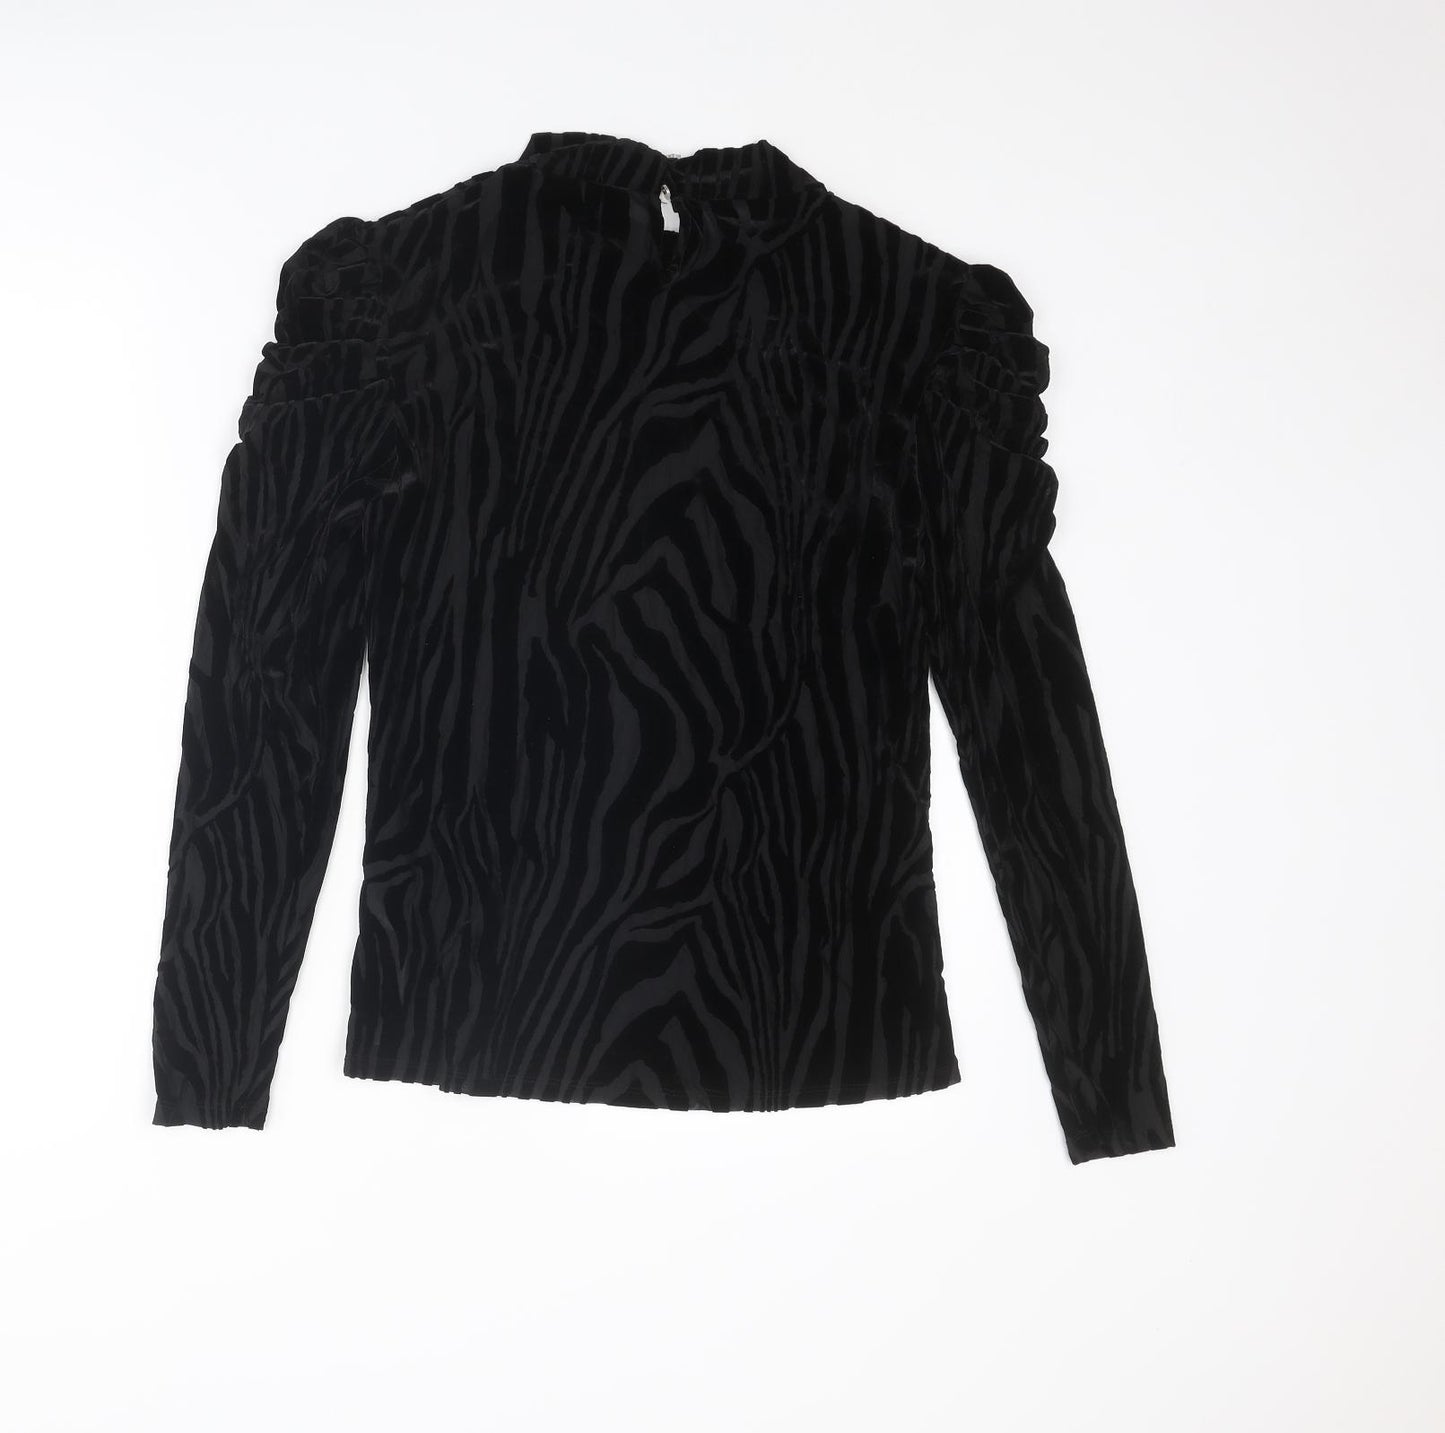 Apricot Womens Black Animal Print Polyester Basic Blouse Size 14 Mock Neck - Ruched Sleeves